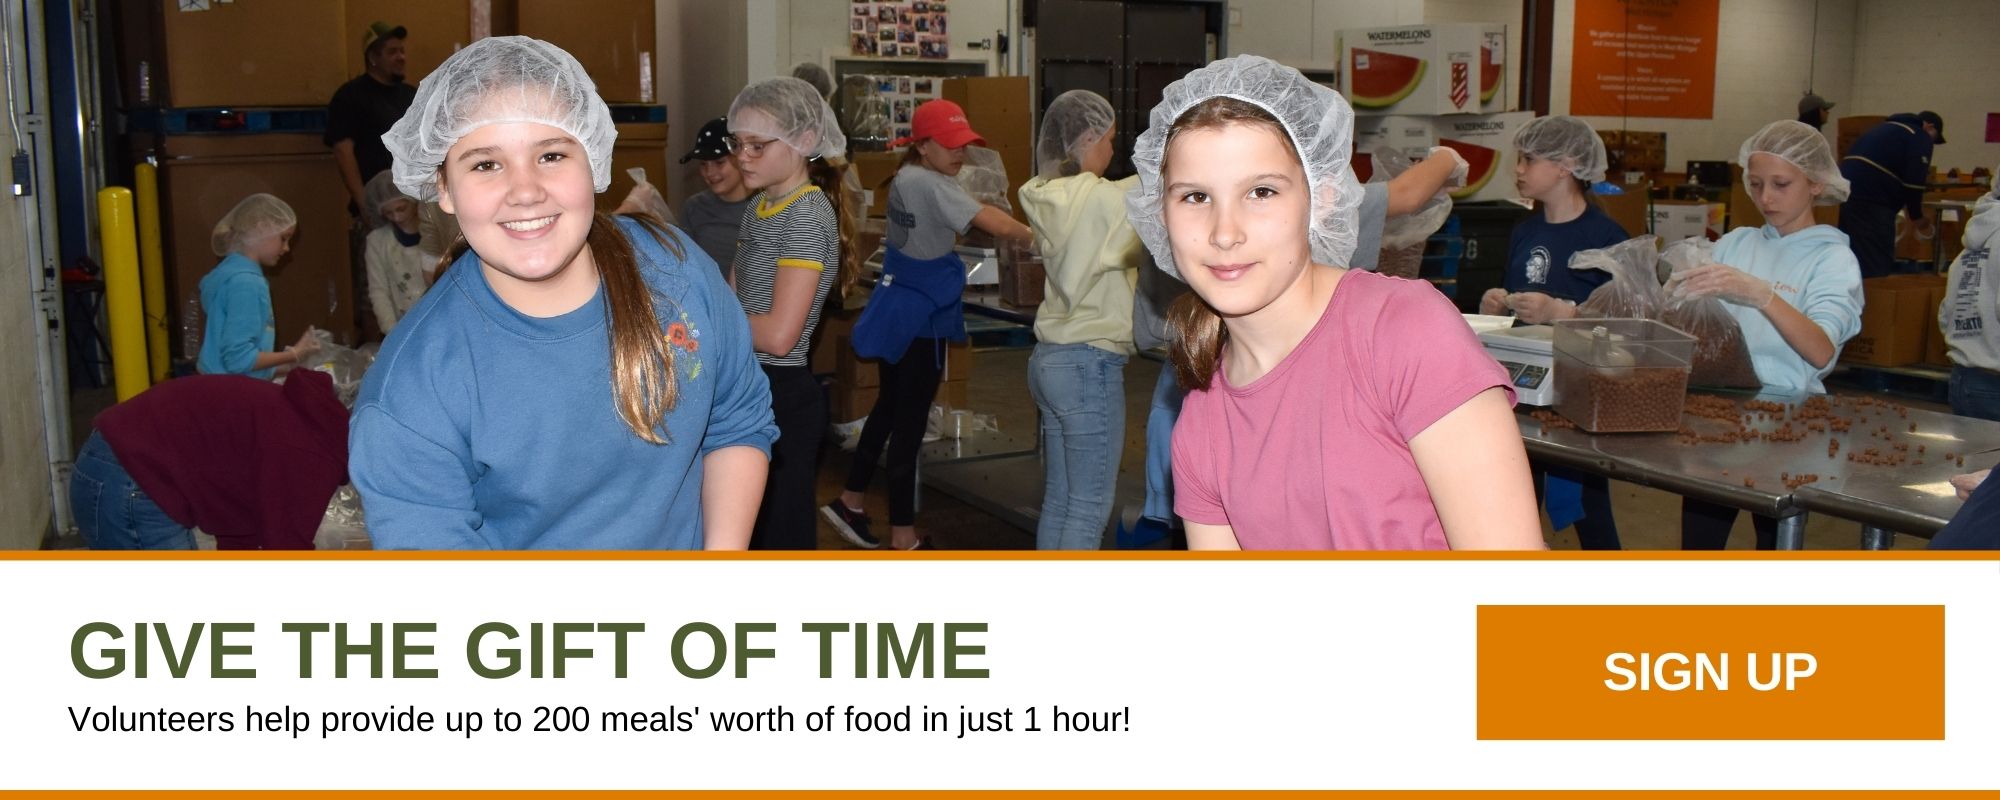 Give the gift of time. Volunteers help provide up to 200 meals' worth of food in just 1 hour! Sign up